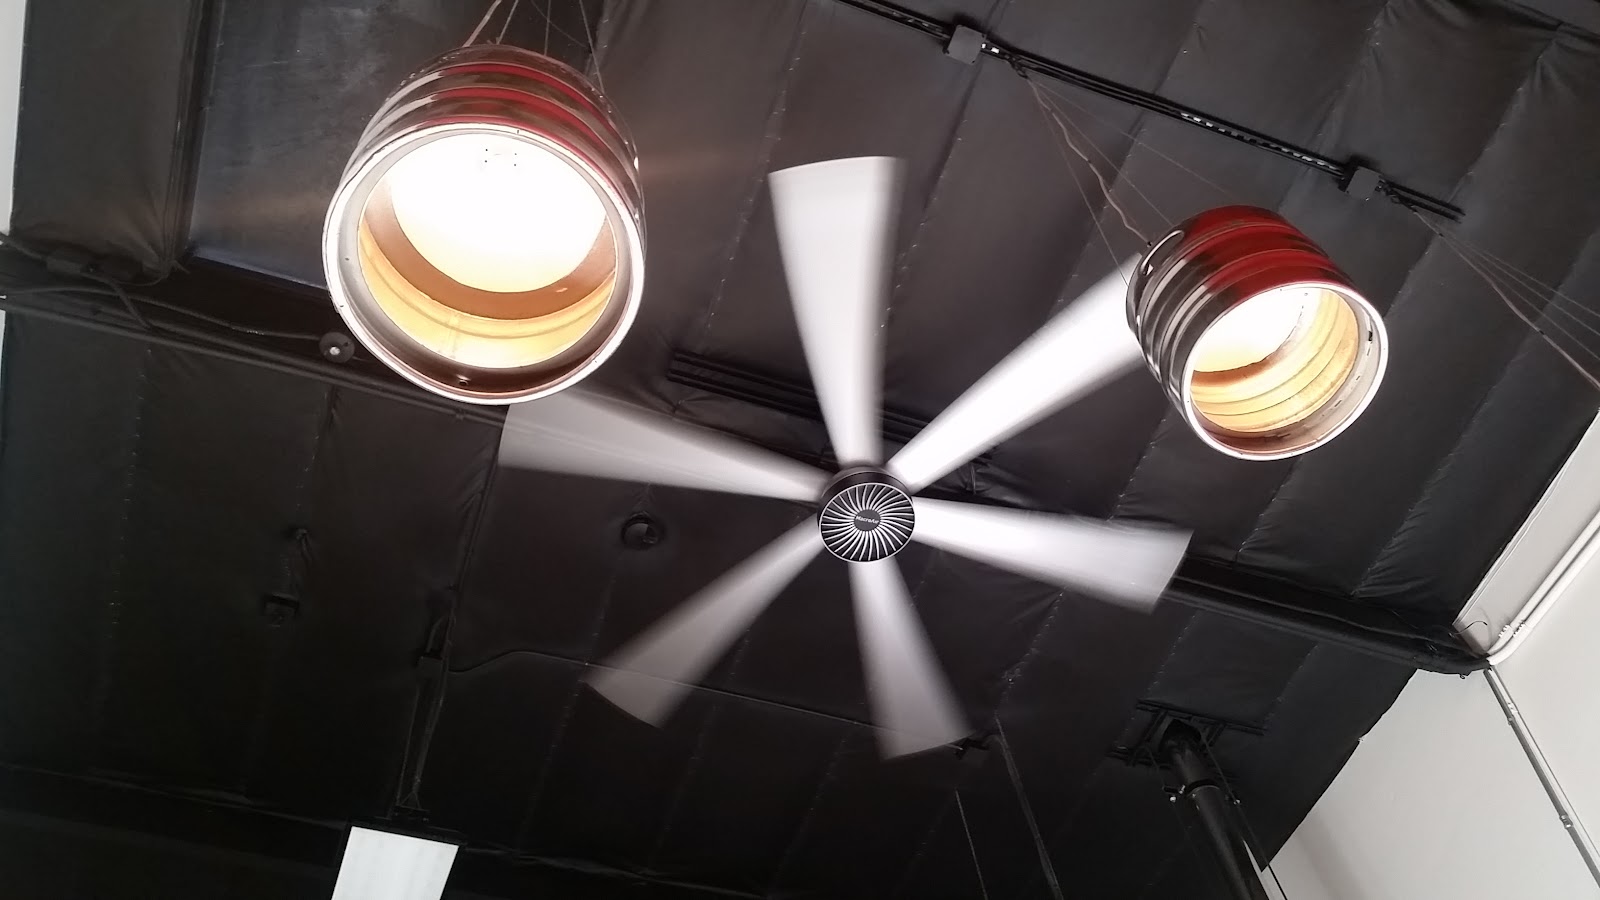 HVLS fans warm in the winter